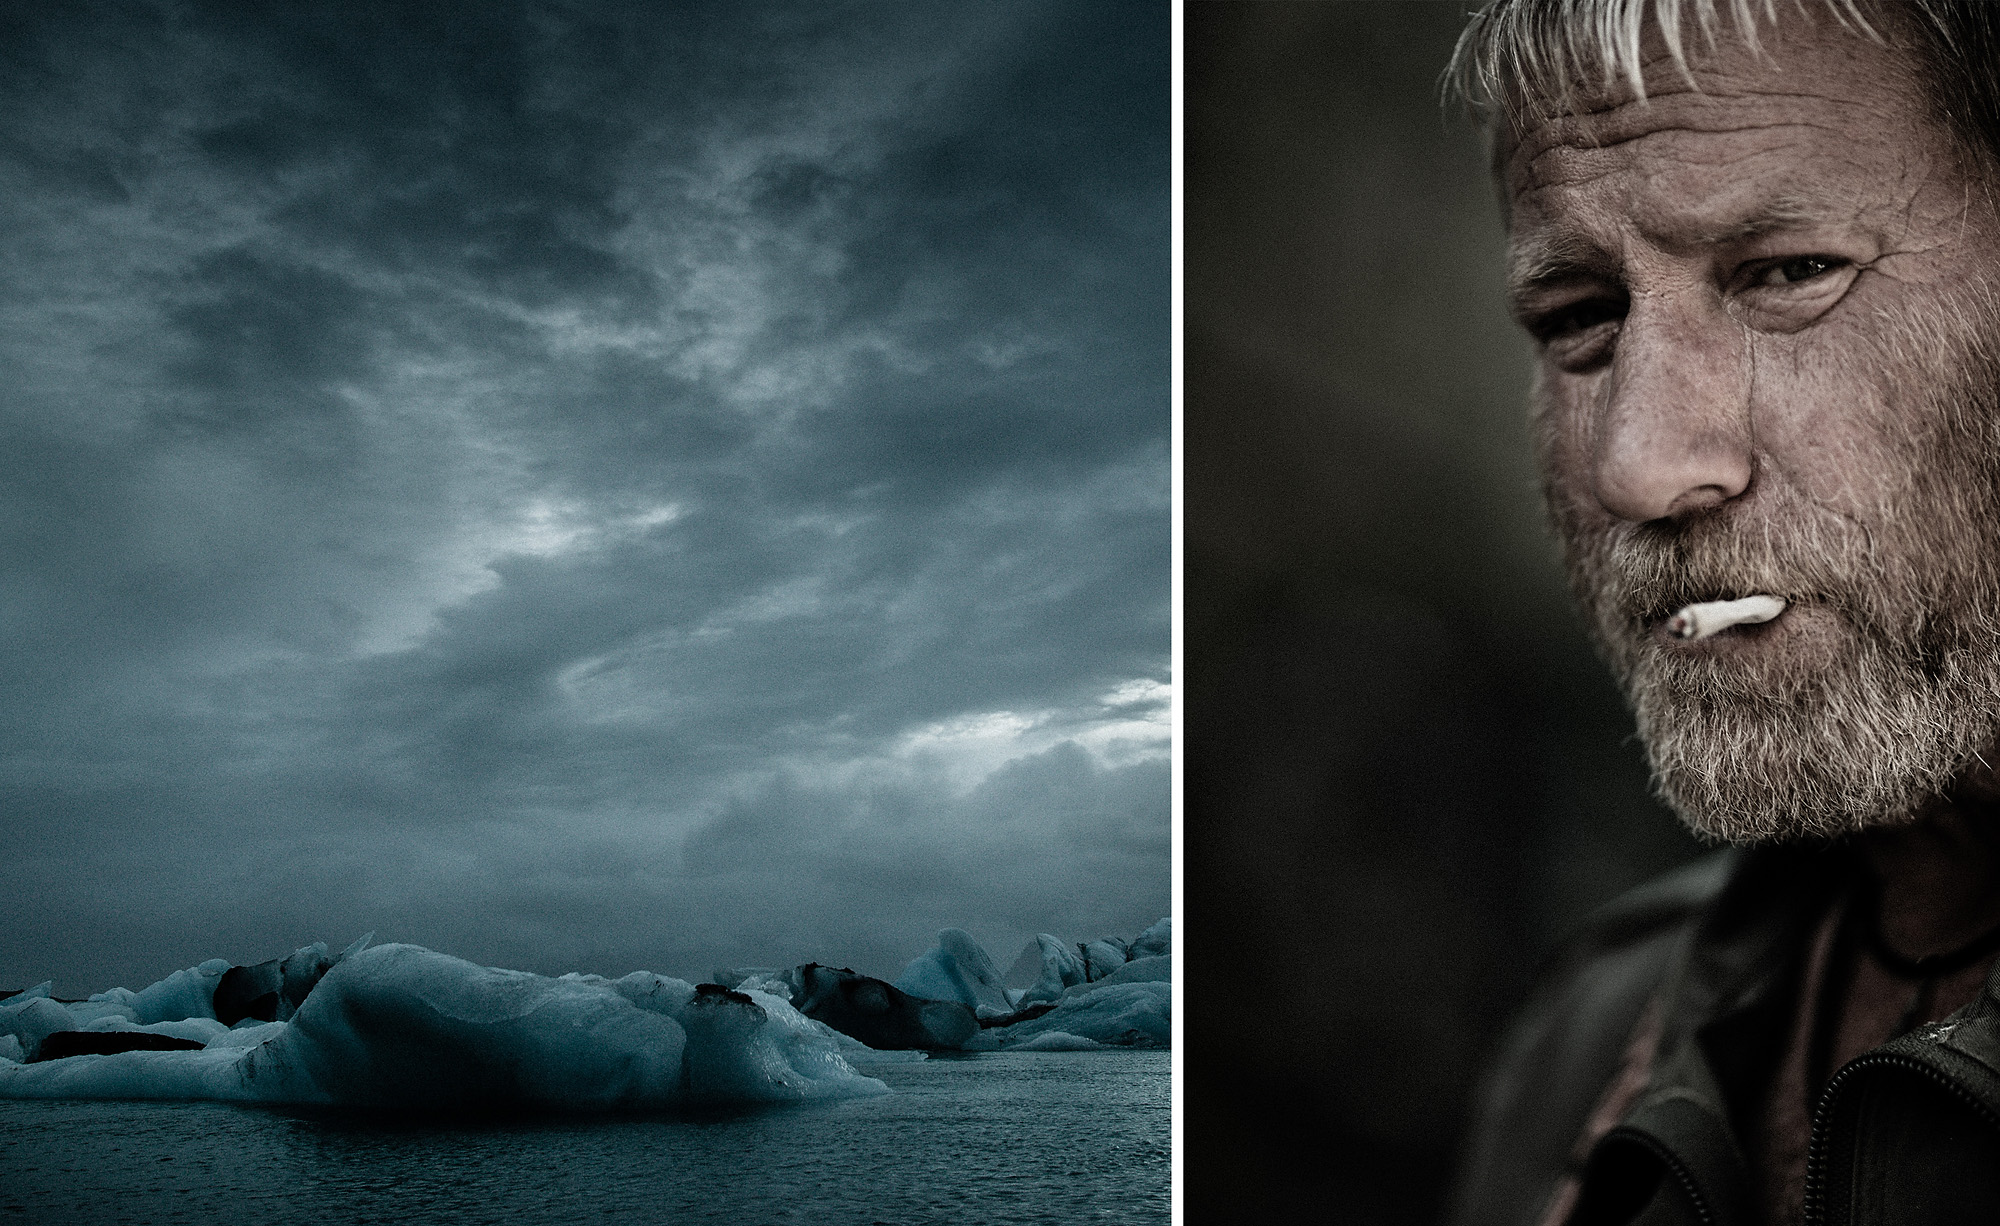 Powerful Grays and Blues of Icebergs Contrast with the Monochromatic Image of a Rugged Deep Sea Fisherman in Iceland.